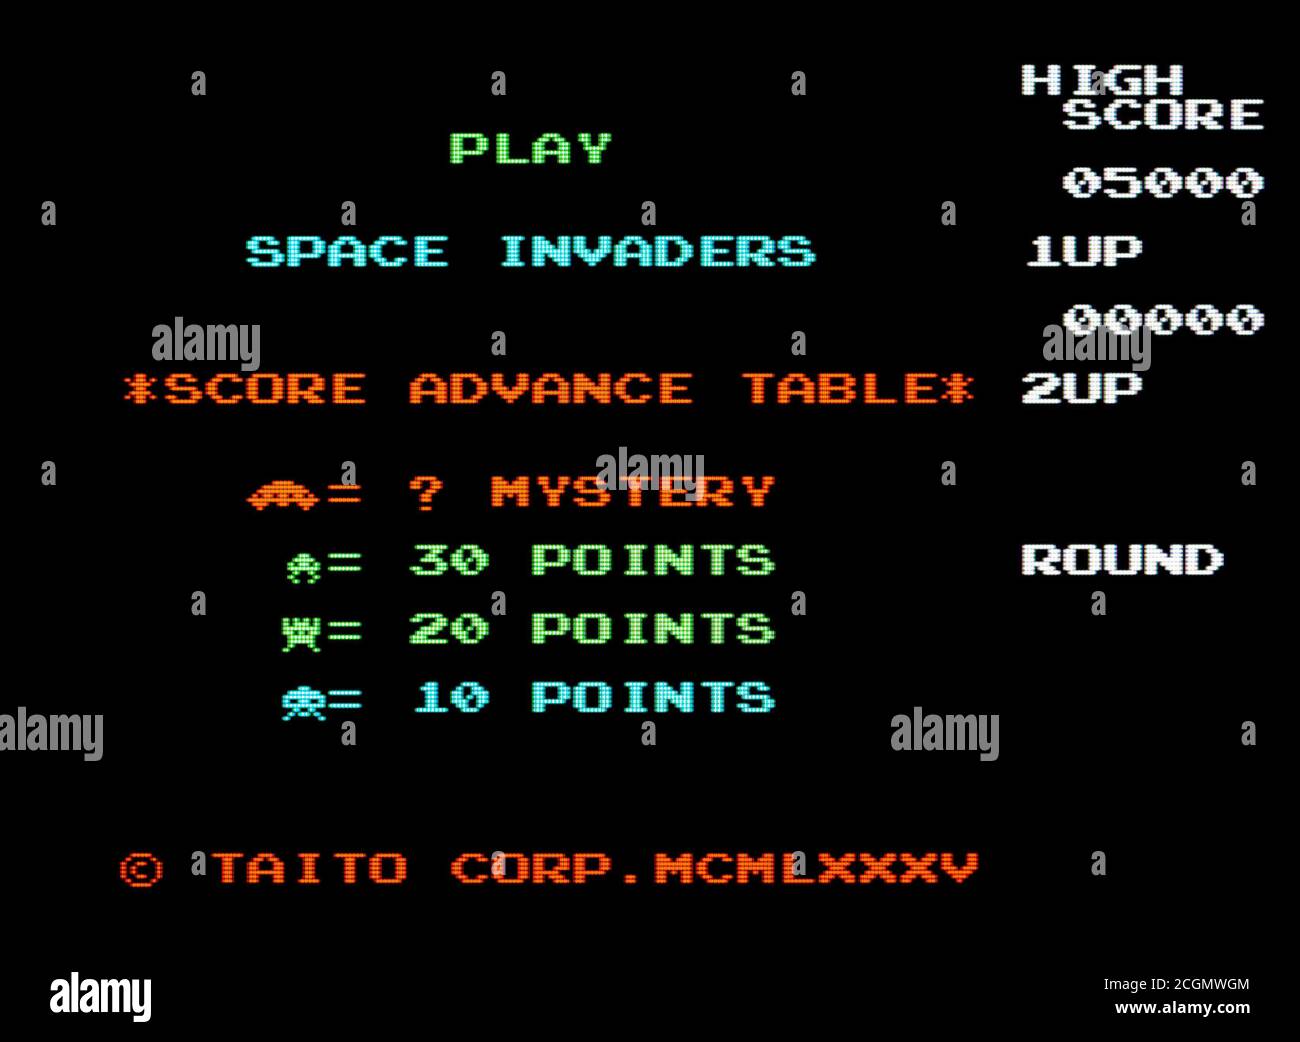 Space Invaders - Nintendo Entertainment System - NES Videogame - Editorial use only Stock Photo